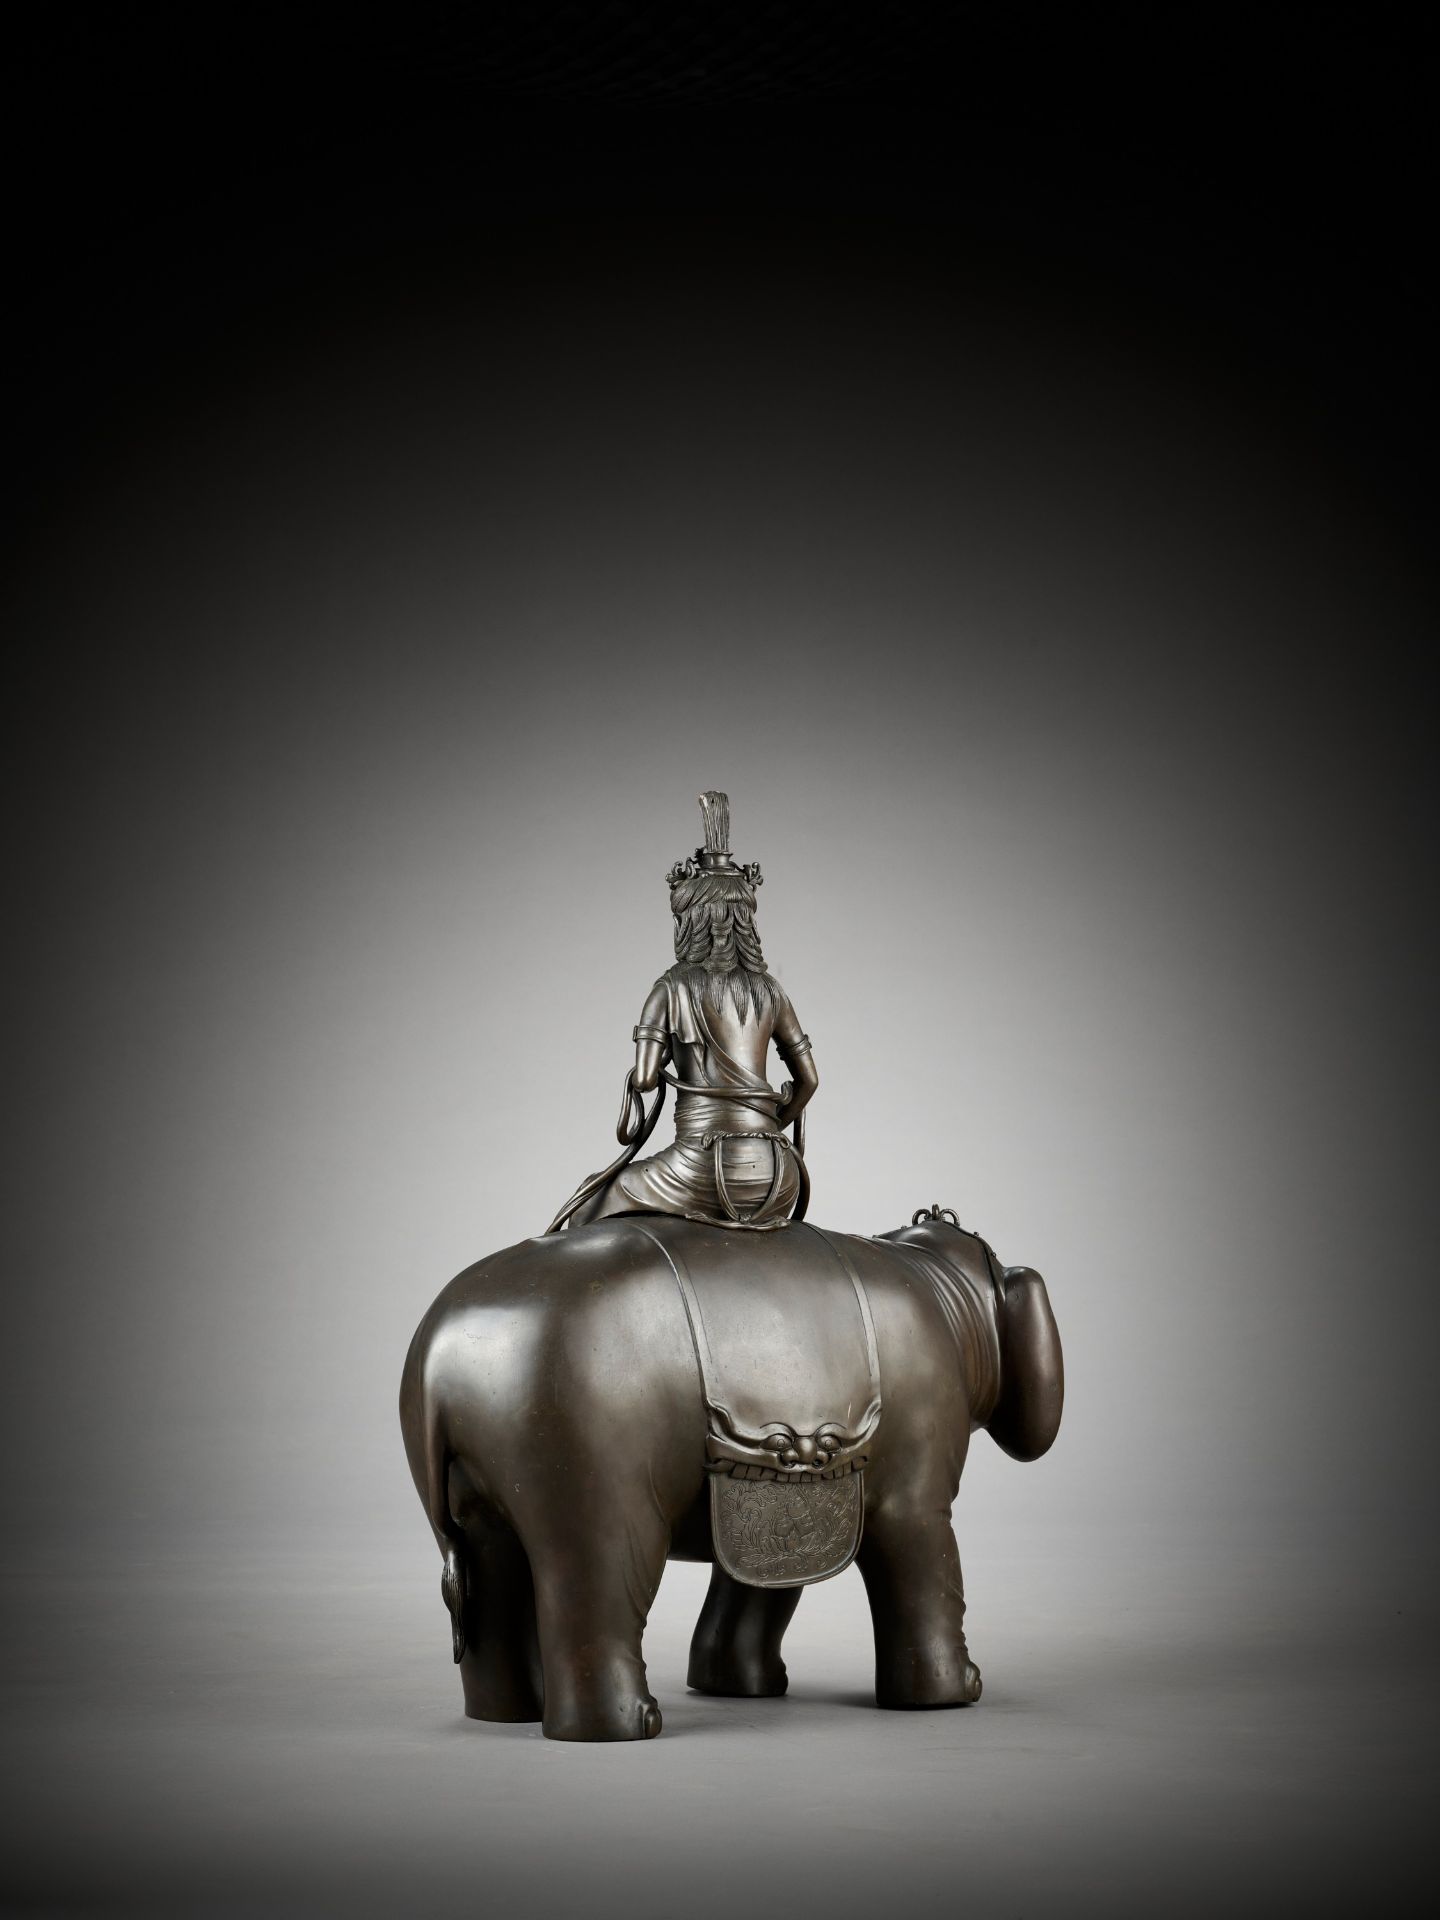 A UNIQUE MONUMENTAL BRONZE OF SAMANTABHADRA ON HIS ELEPHANT, SOLD AT THE 1901 GLASGOW EXHIBITION - Image 12 of 19